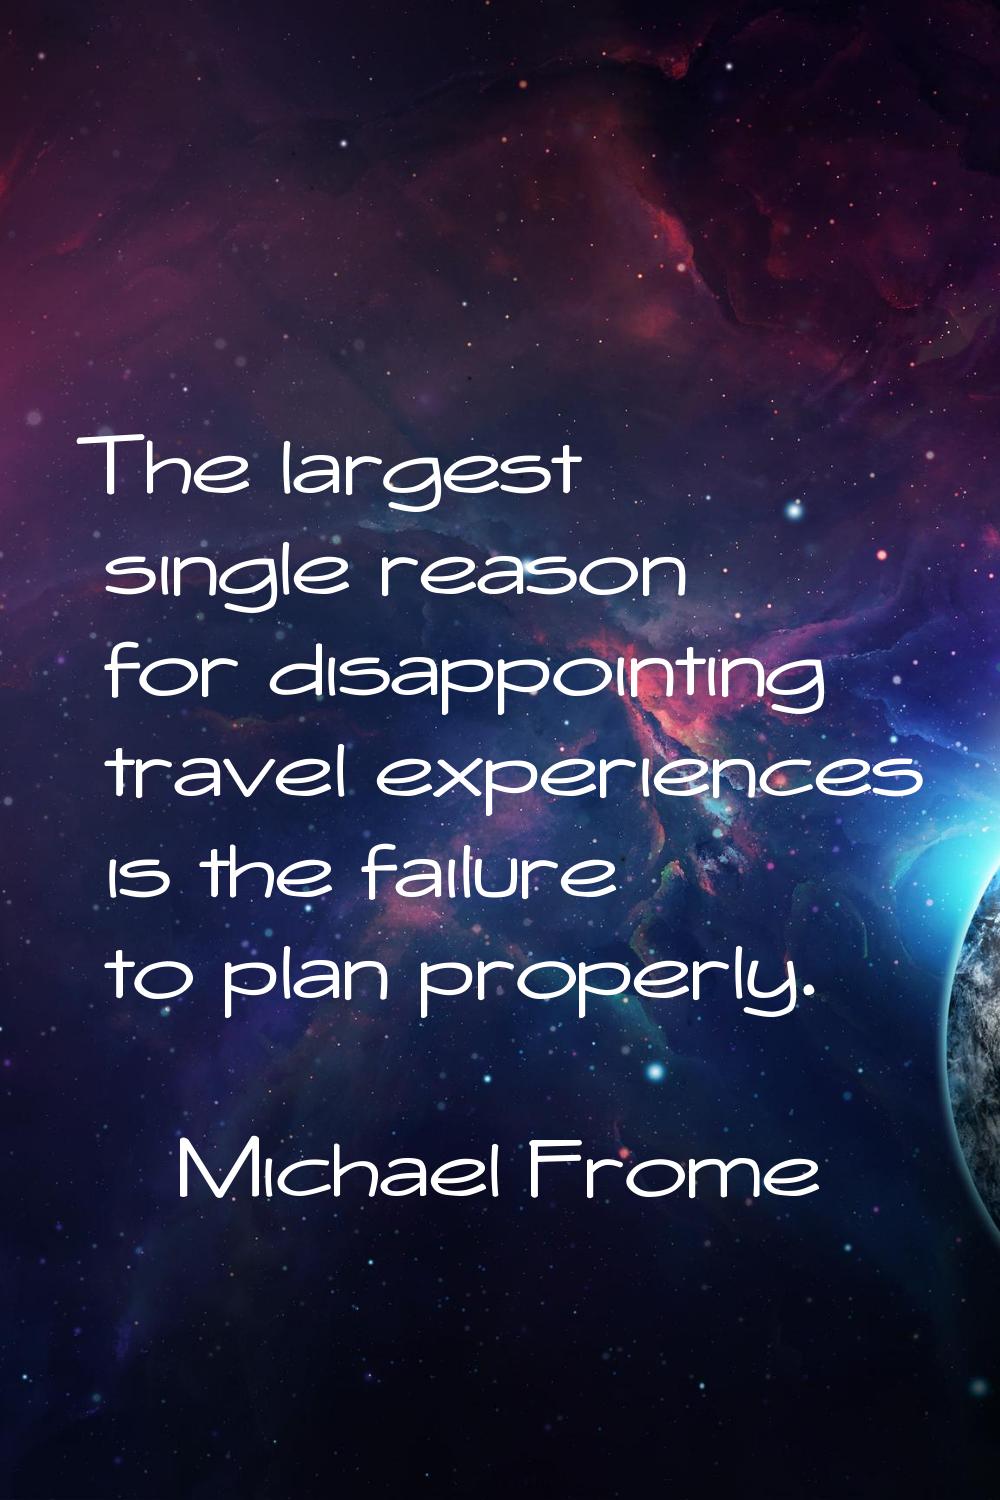 The largest single reason for disappointing travel experiences is the failure to plan properly.